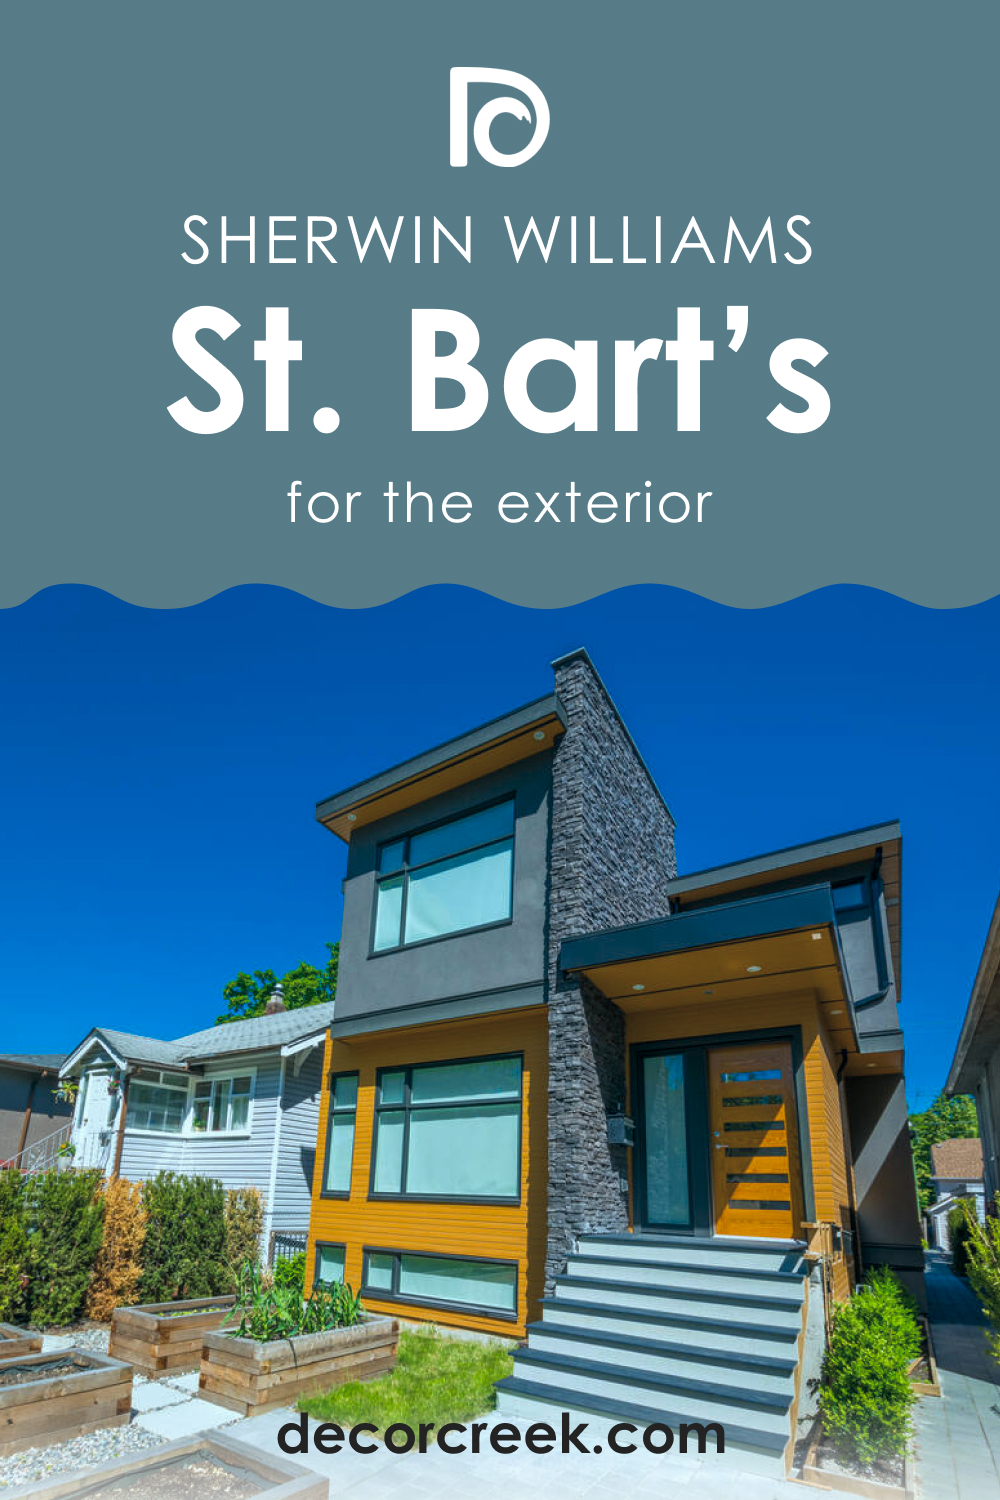 How to Use SW 7614 St. Bart’s for an Exterior?